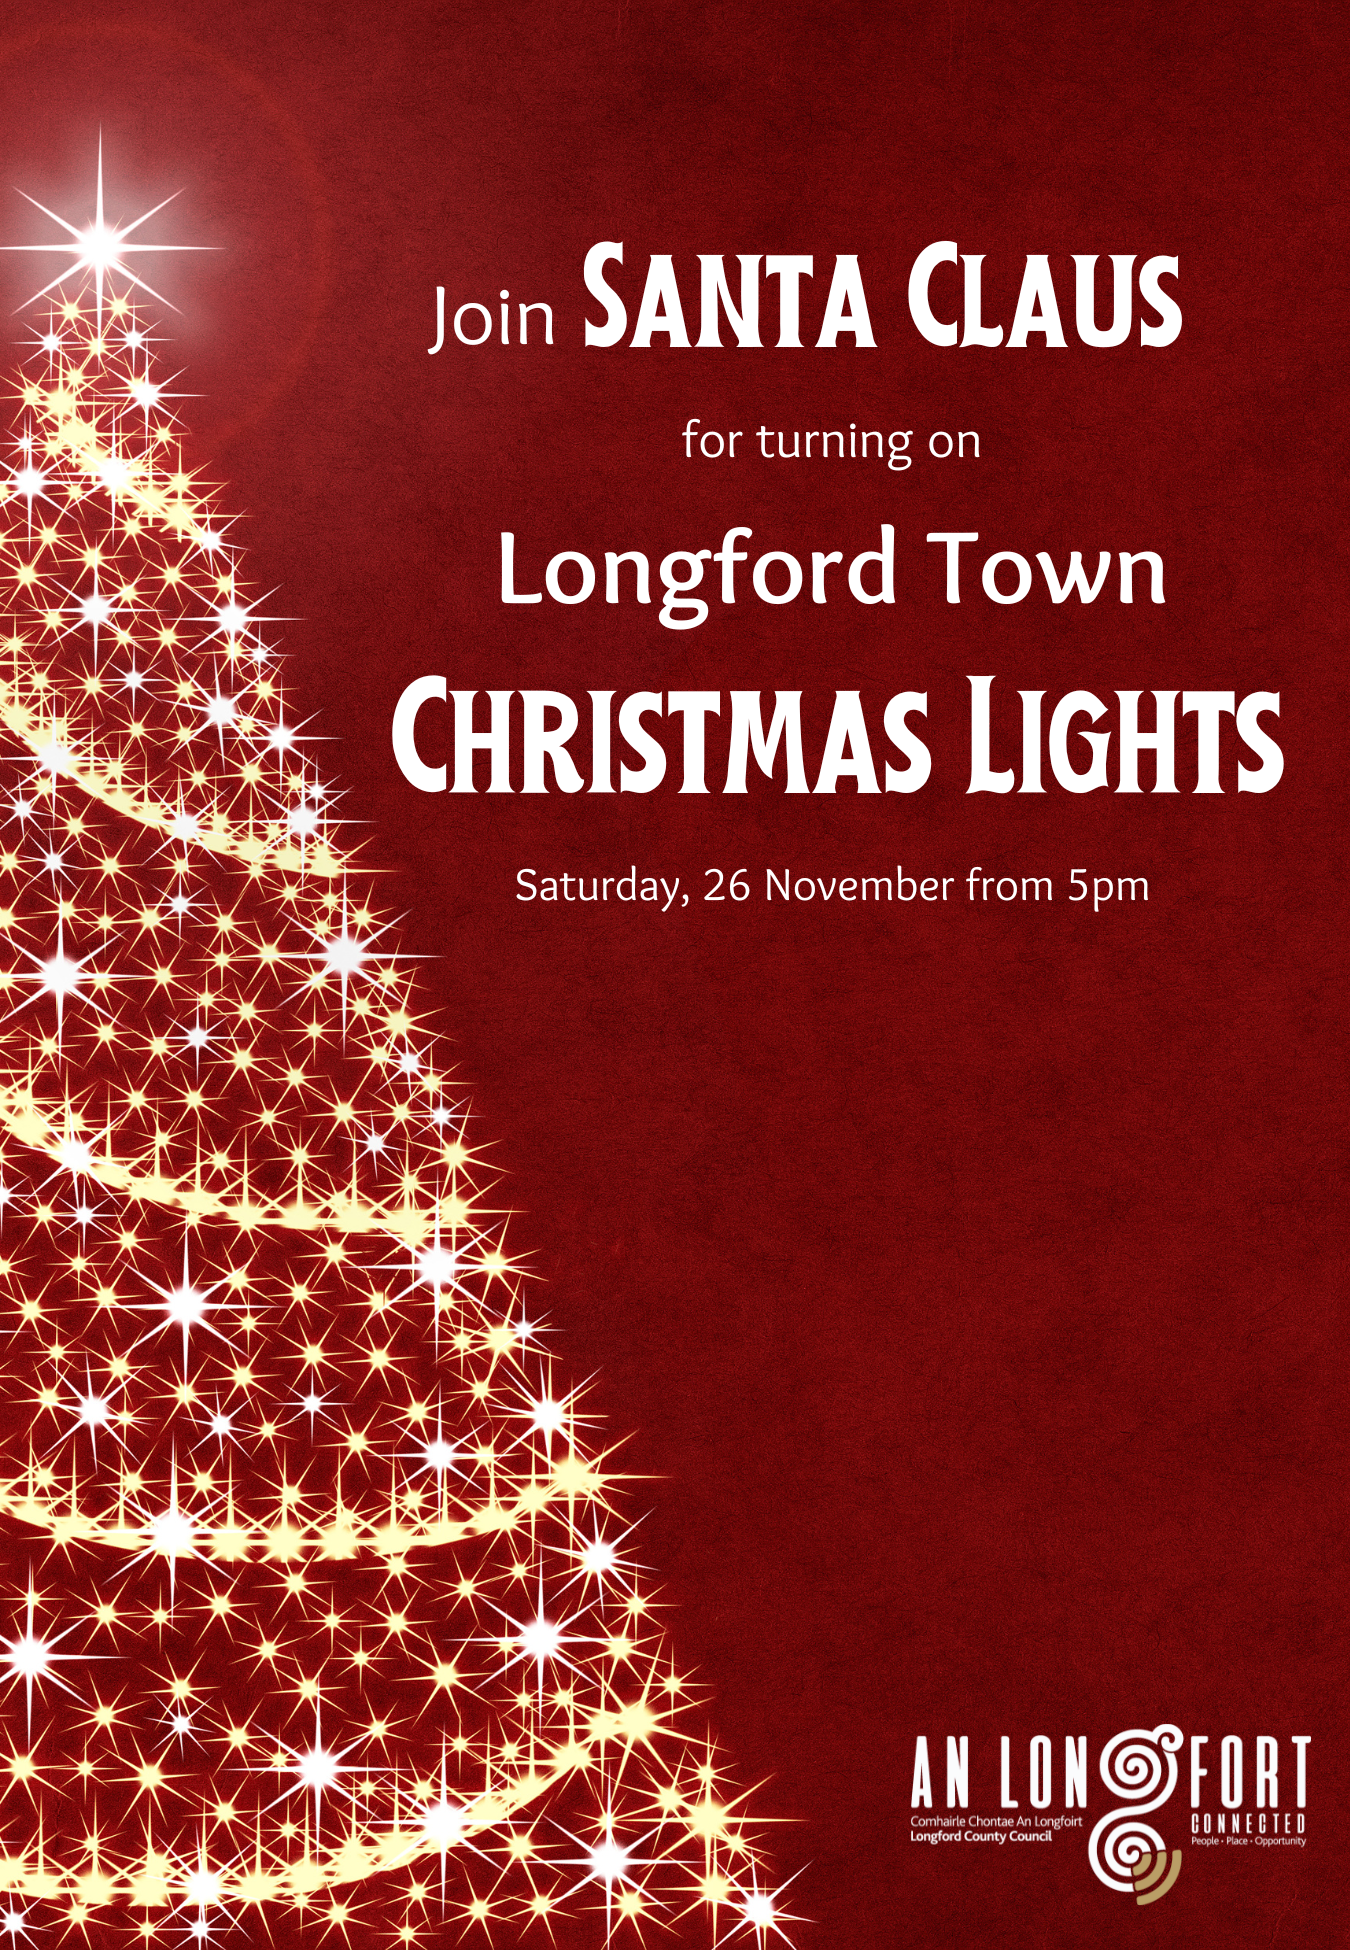 Join Santa Claus in for turning on Longford Town Christmas lights on Saturday, 26 November at 5pm